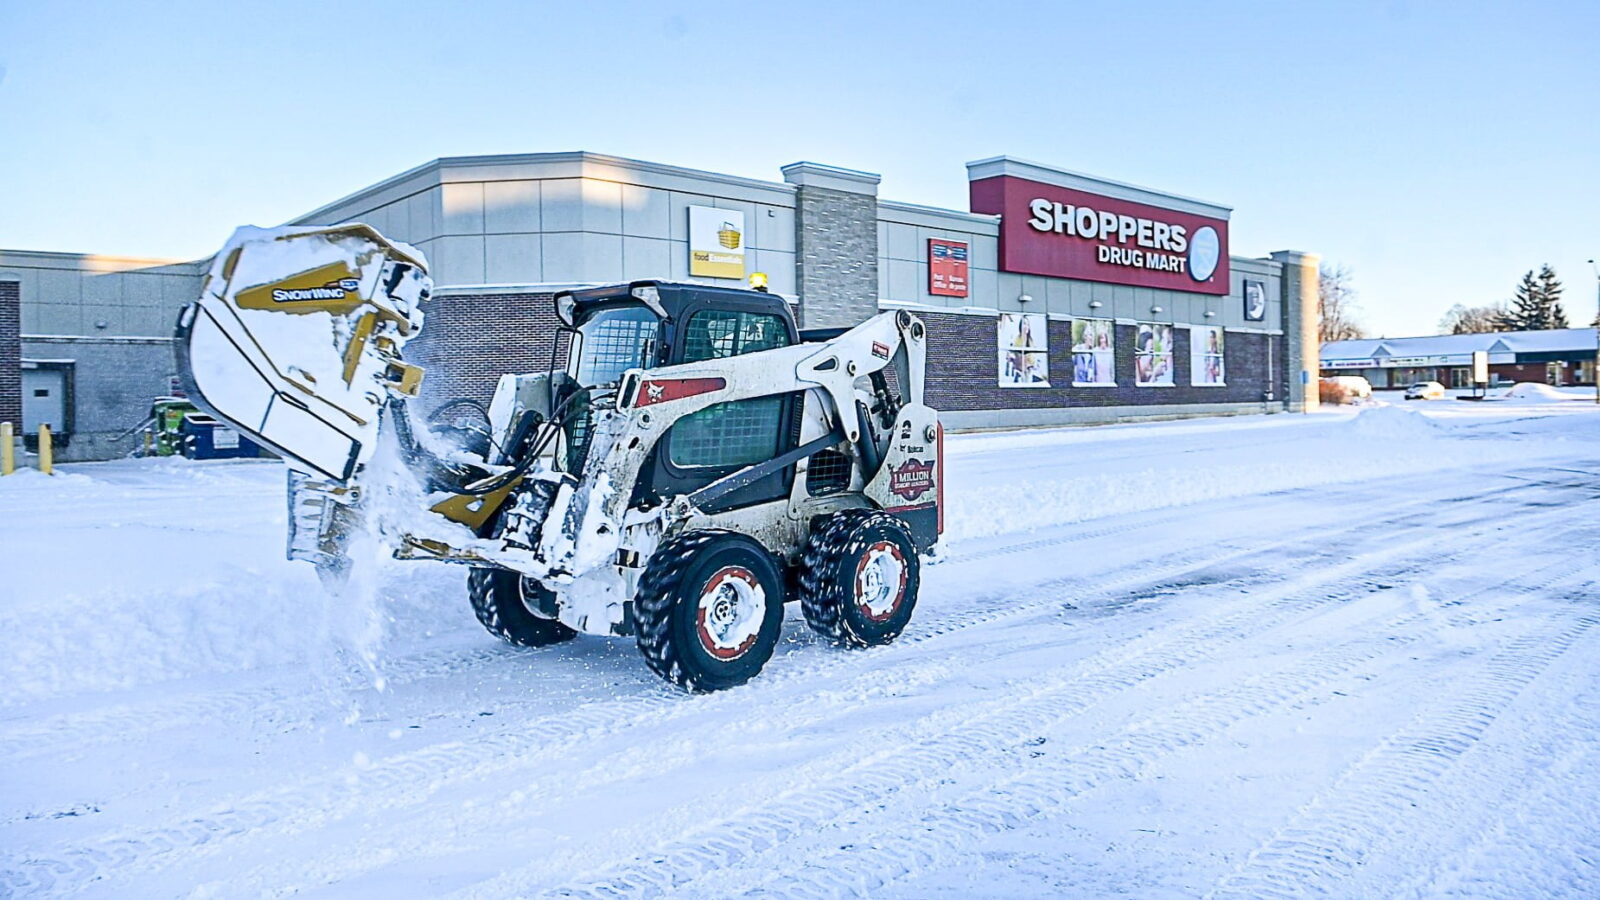 Creative Concepts Commercial snow removal services, skid steer clearing snow.